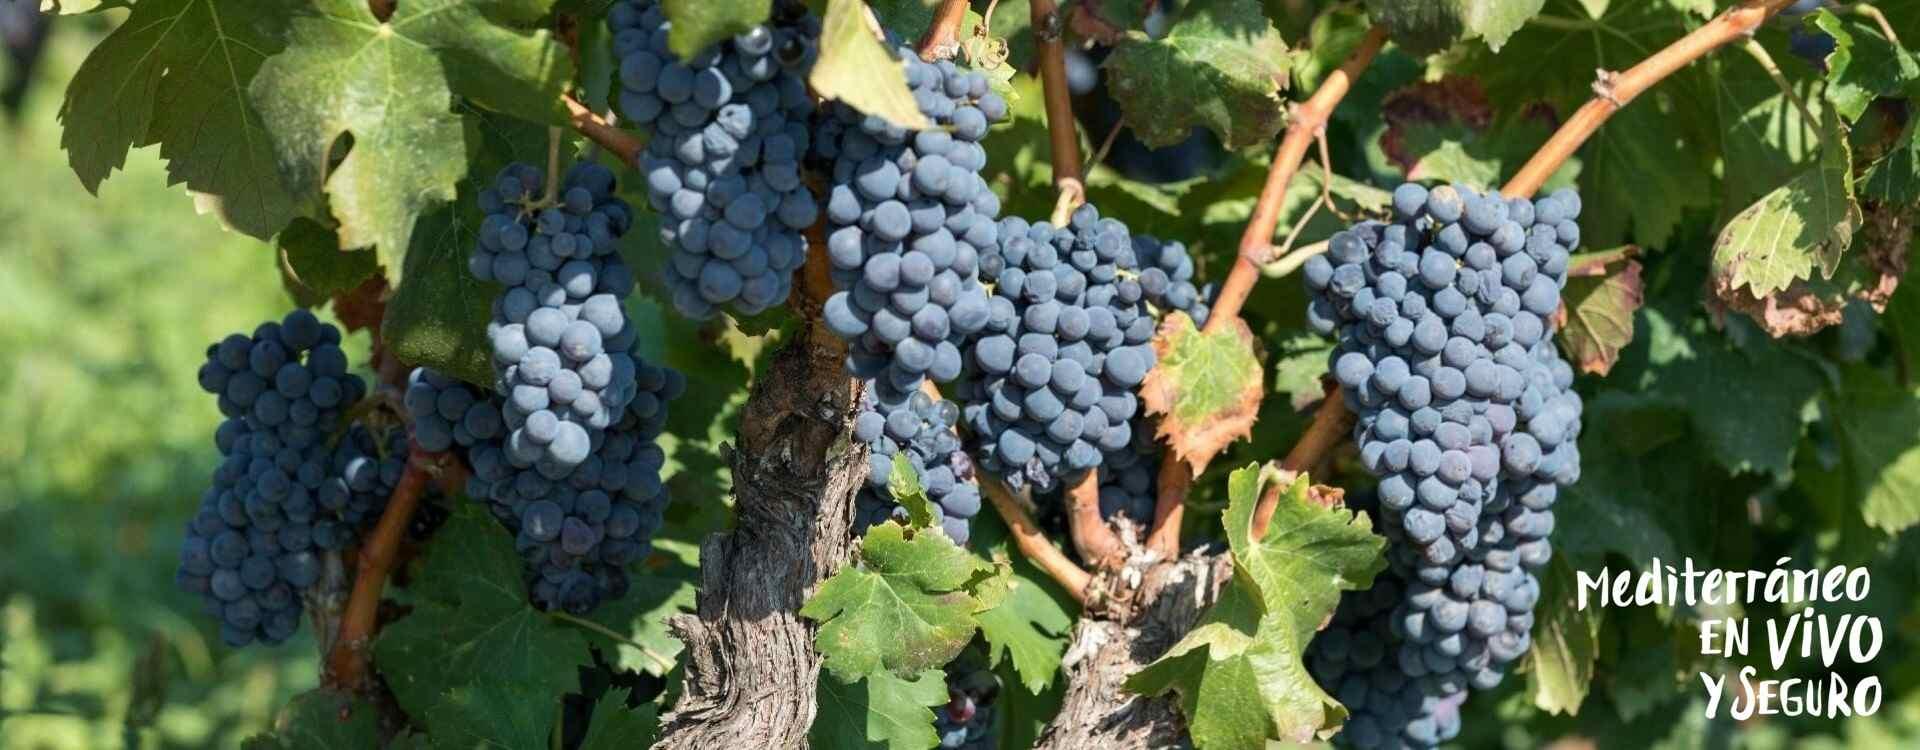 Image of the grapes in the vineyards of Llíber	